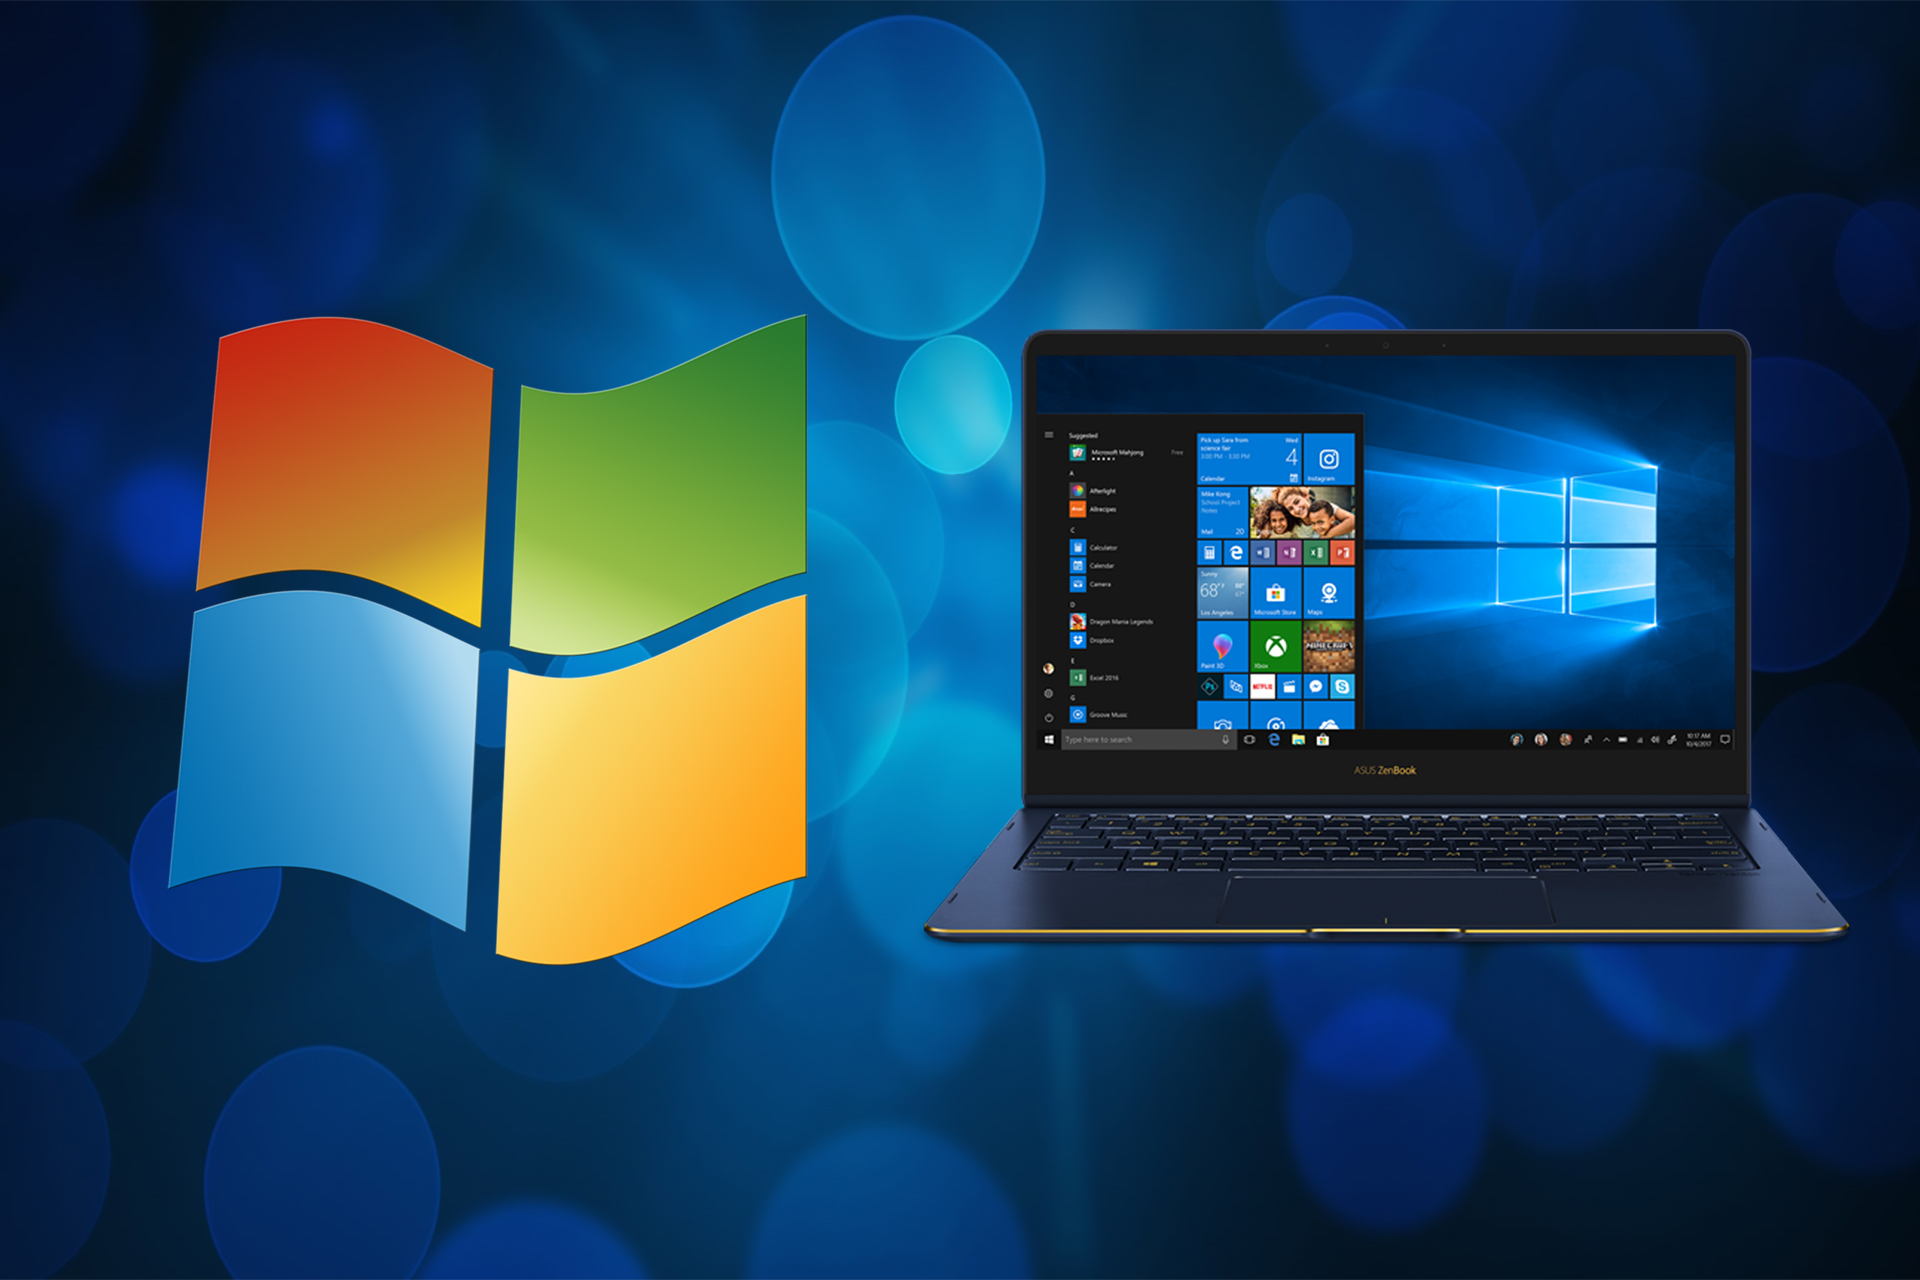 How to upgrade to Windows 10 with low disk space